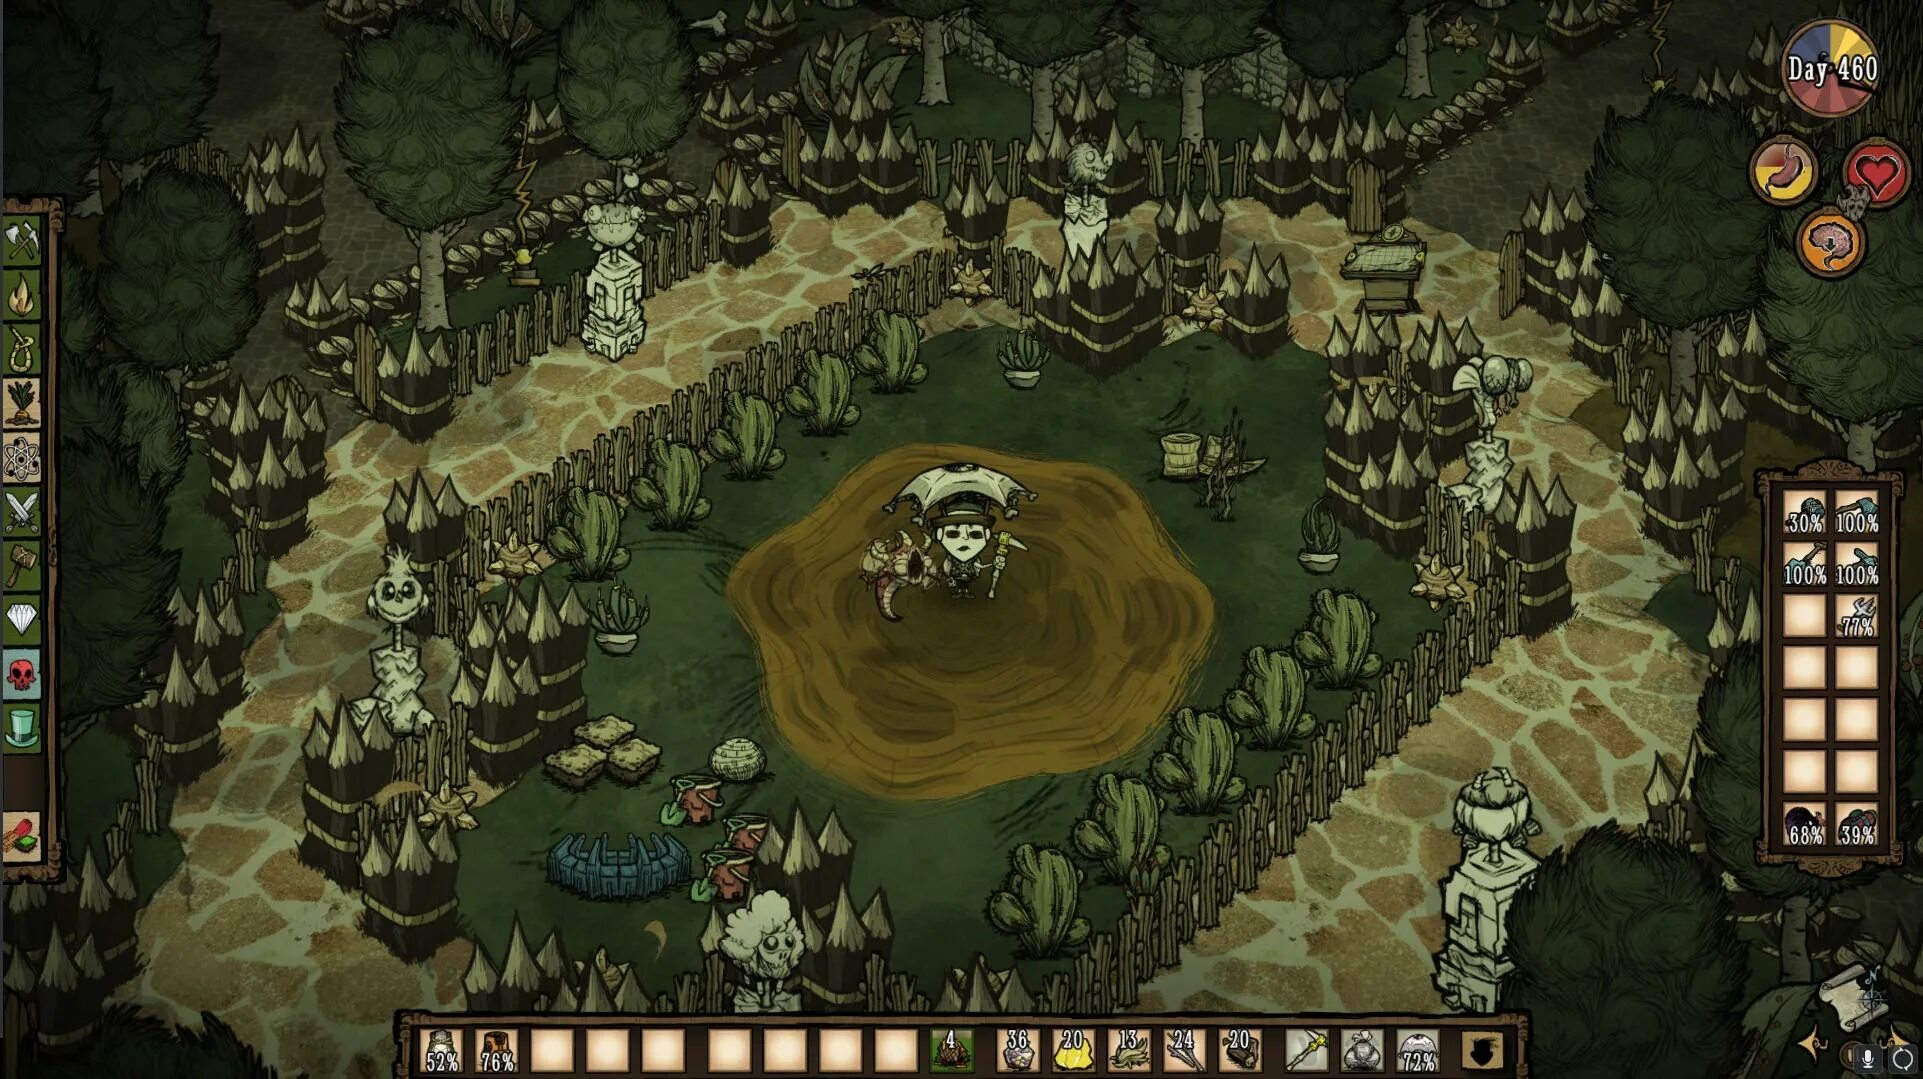 Don't Starve together Оазис. Don't Starve together база. Донт старв базы. Донт старв база.